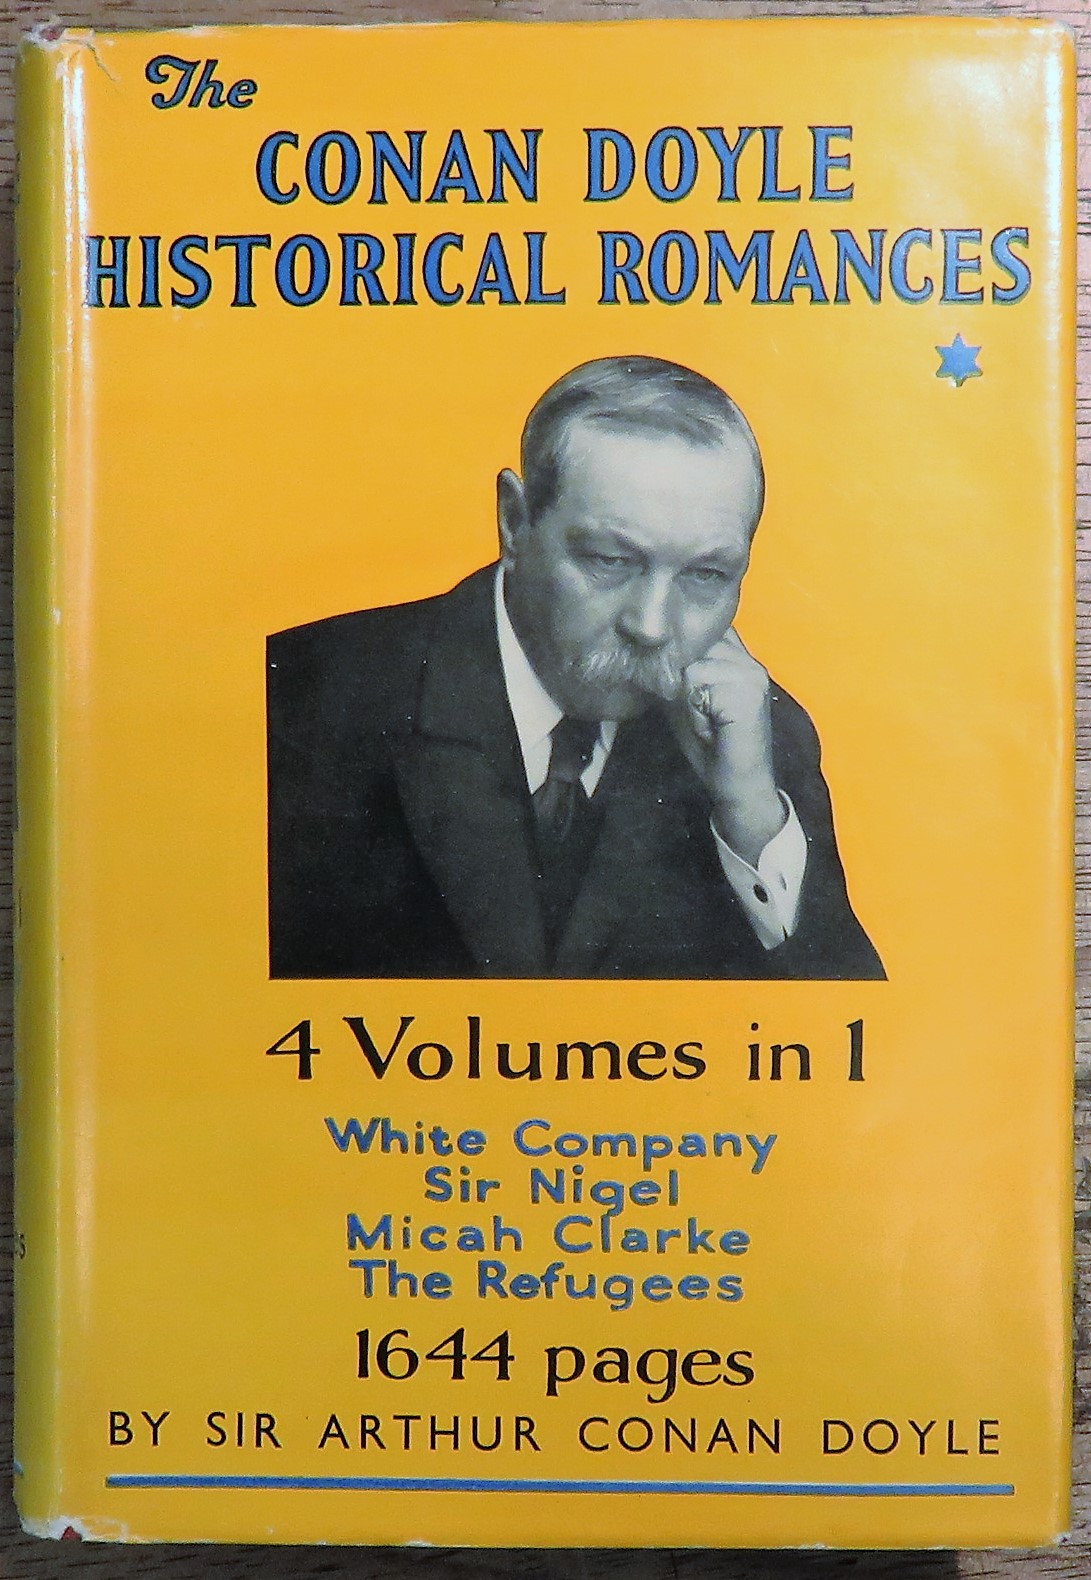 The Conan Doyle Historical Romances Volume One: The White Company, Sir Nigel, Micah Clarke, The Refugees